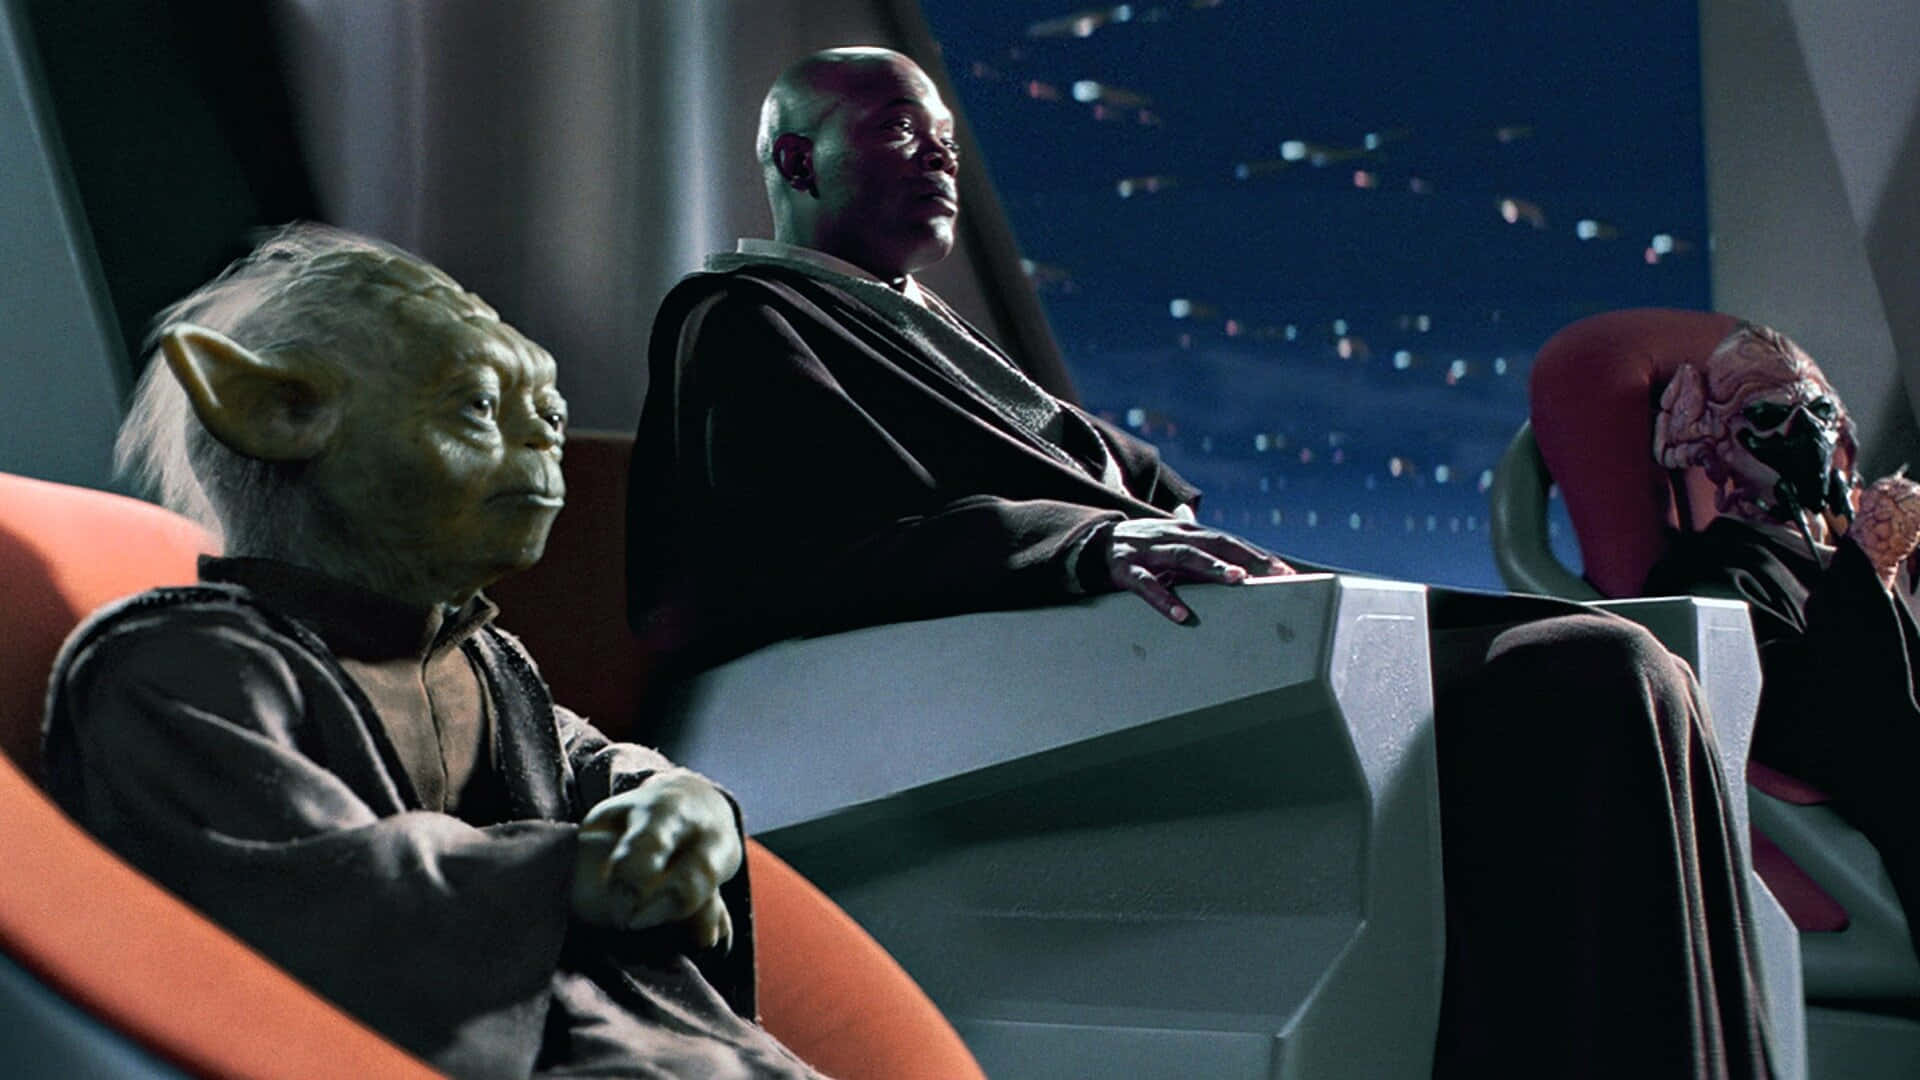 Jedi Council Meeting: Master Yoda and the Jedi Council in Session Wallpaper